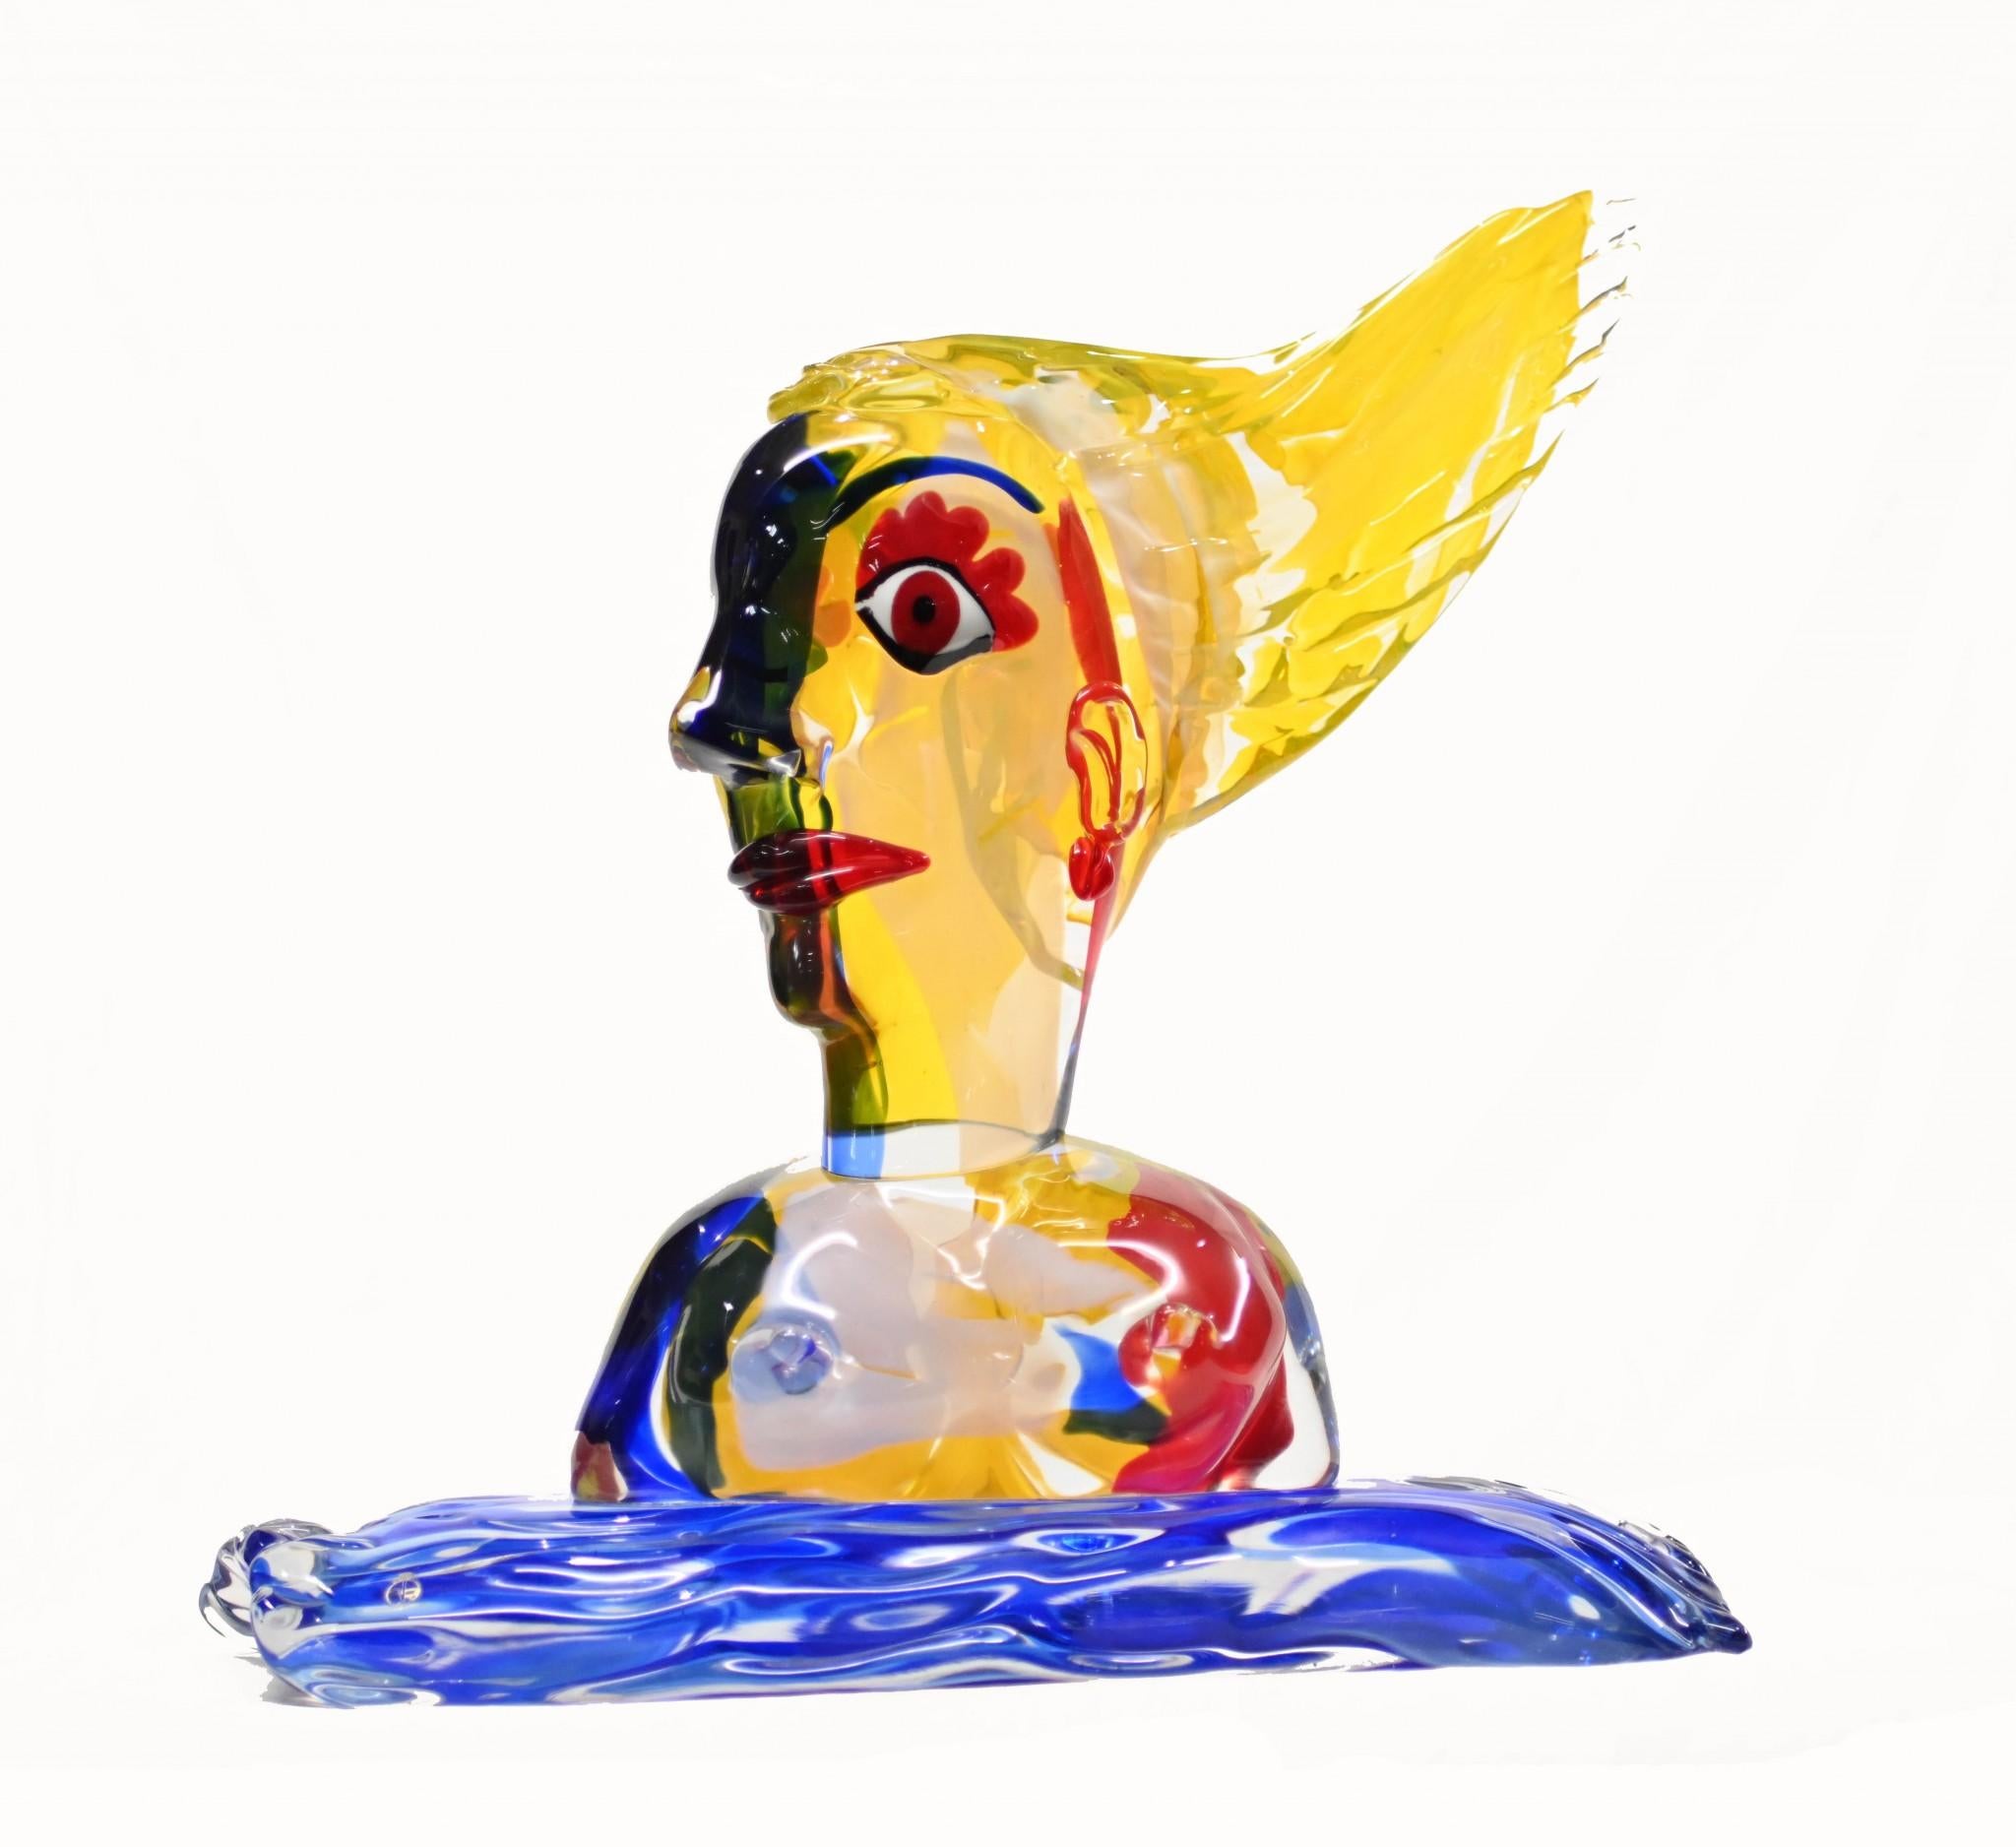 Wonderful Italian Murano glass bust of a female
Very vivid colours to the glass and as it is solid glass the piece is heavy
Such a great look to this, reminds me of the artist Miro who perhaps it is after
We are not sure who the lady is, any ideas